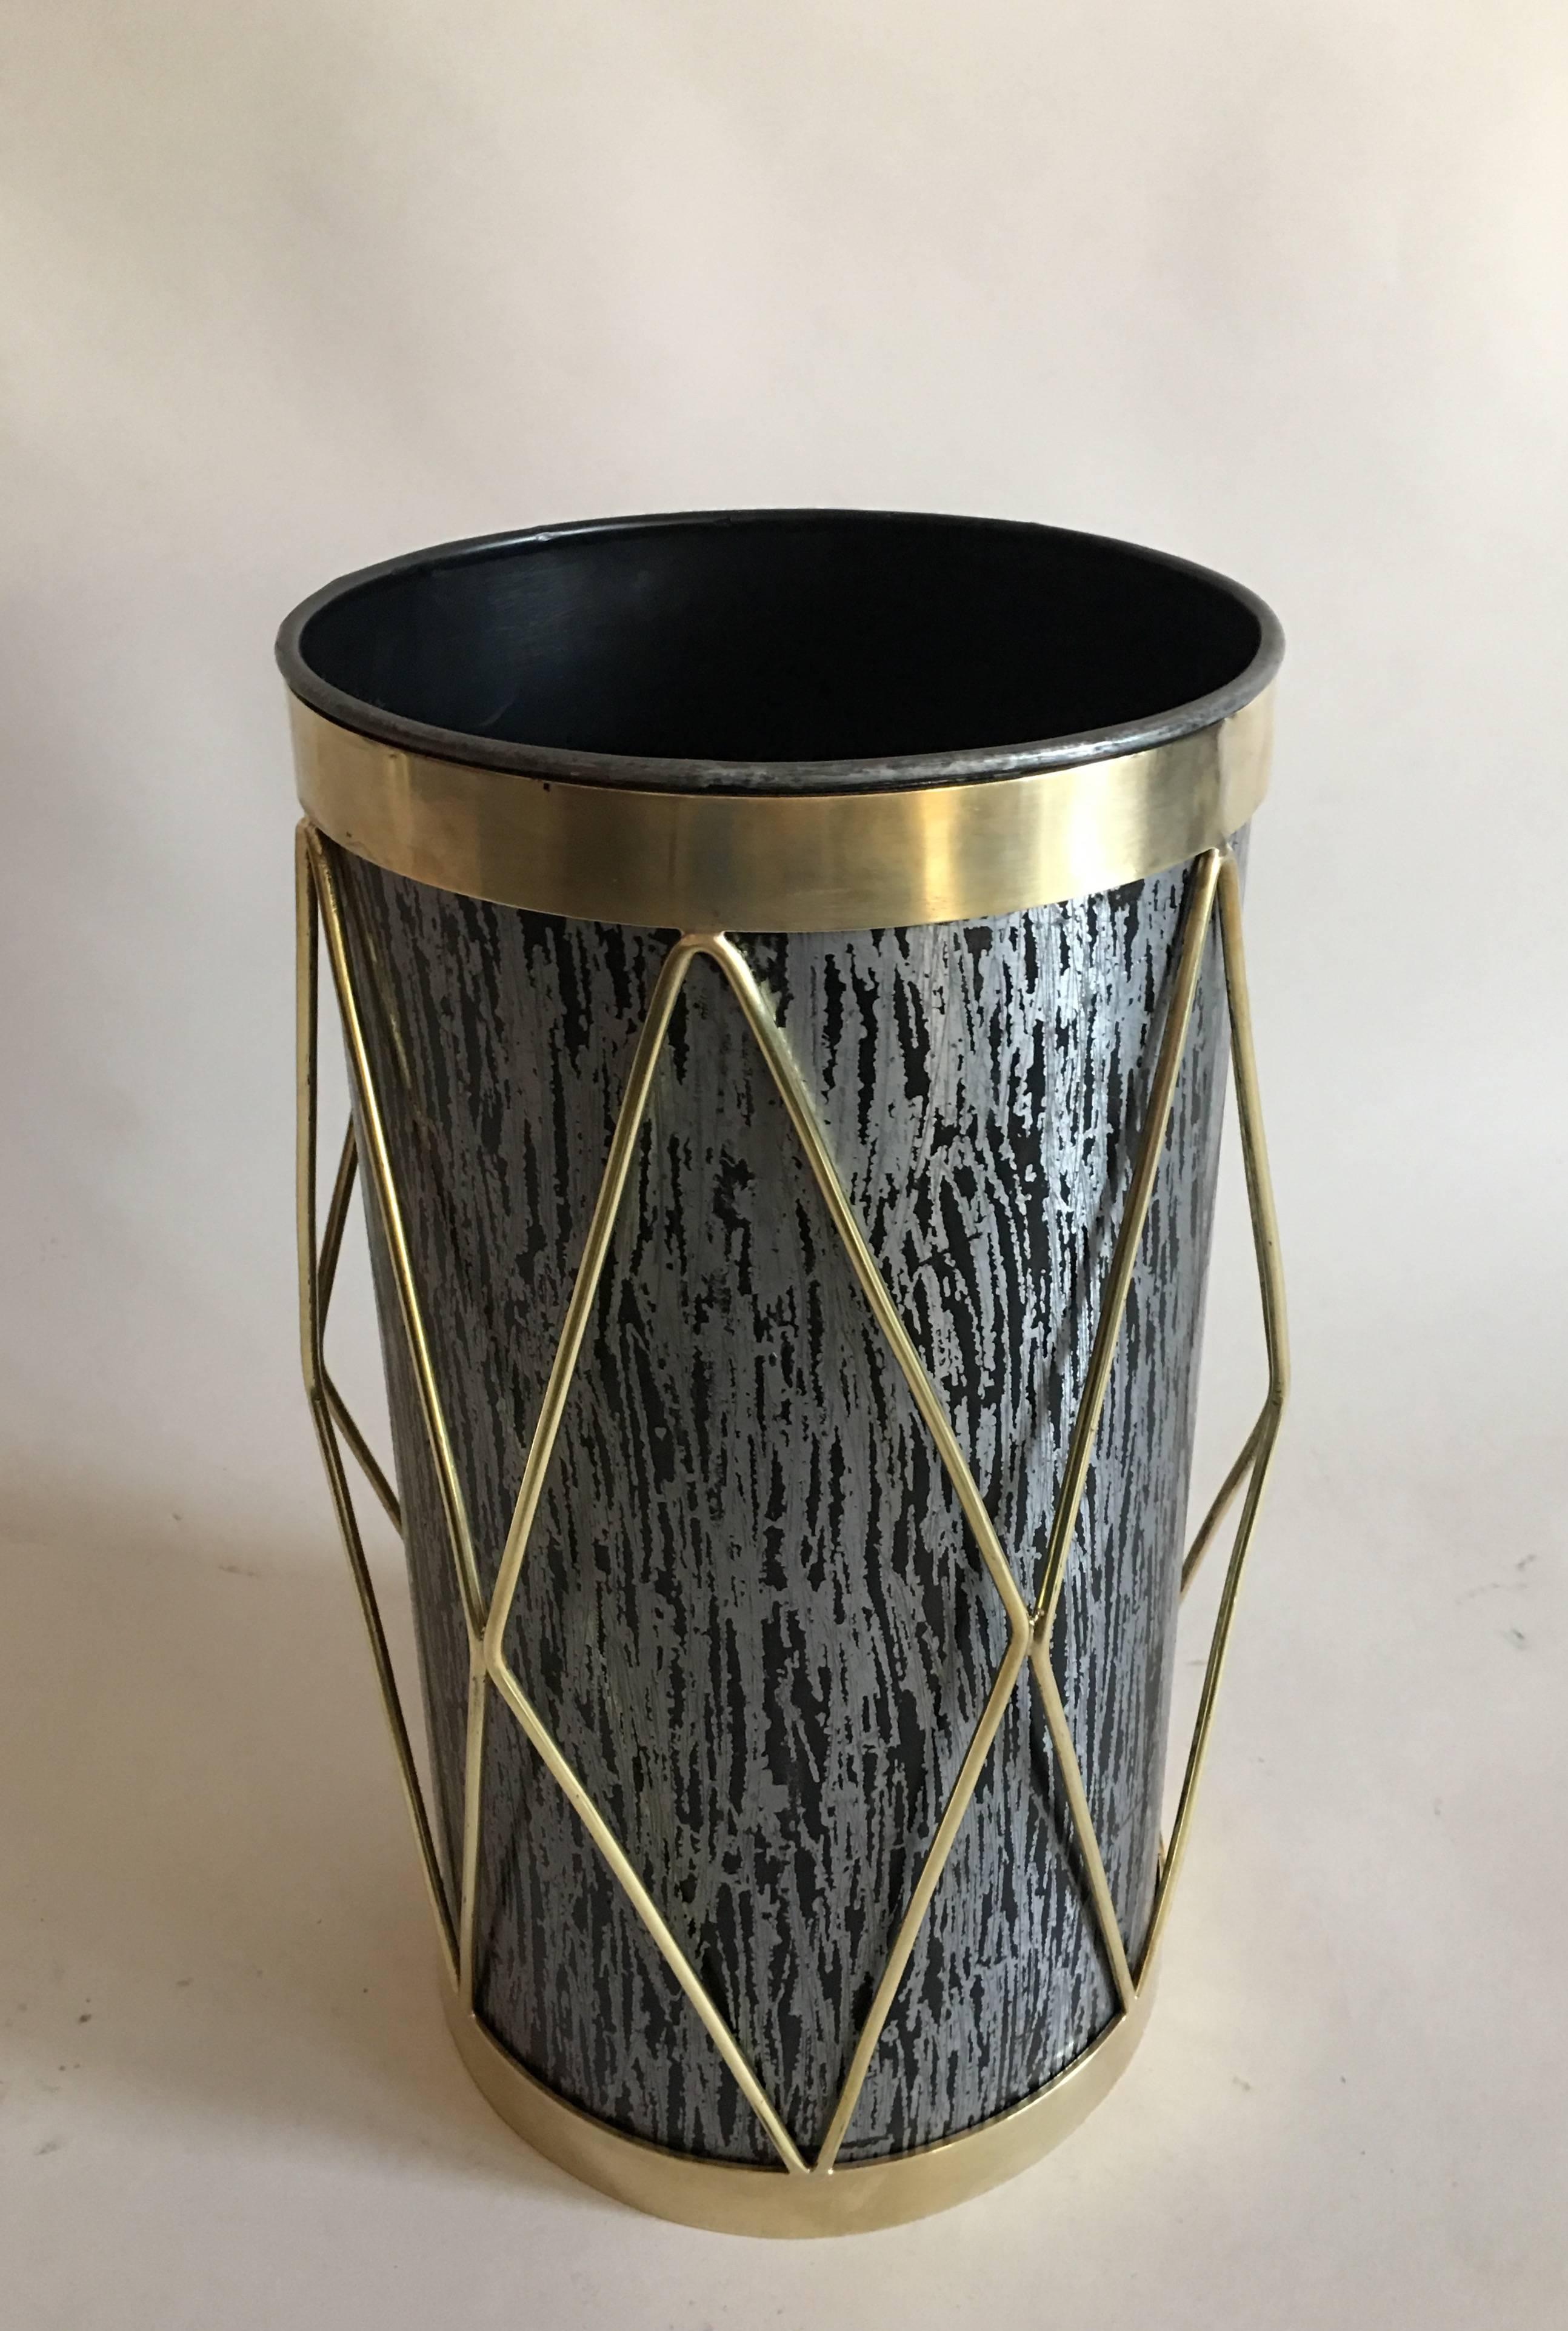 2 French Mid-Century Modern brass and steel umbrella stands, waste baskets / trash cans. 

The pieces are composed of black stippled steel, and adorned with a dramatic brass overlay in a chevron or harlequin pattern.

Priced and sold individually. 